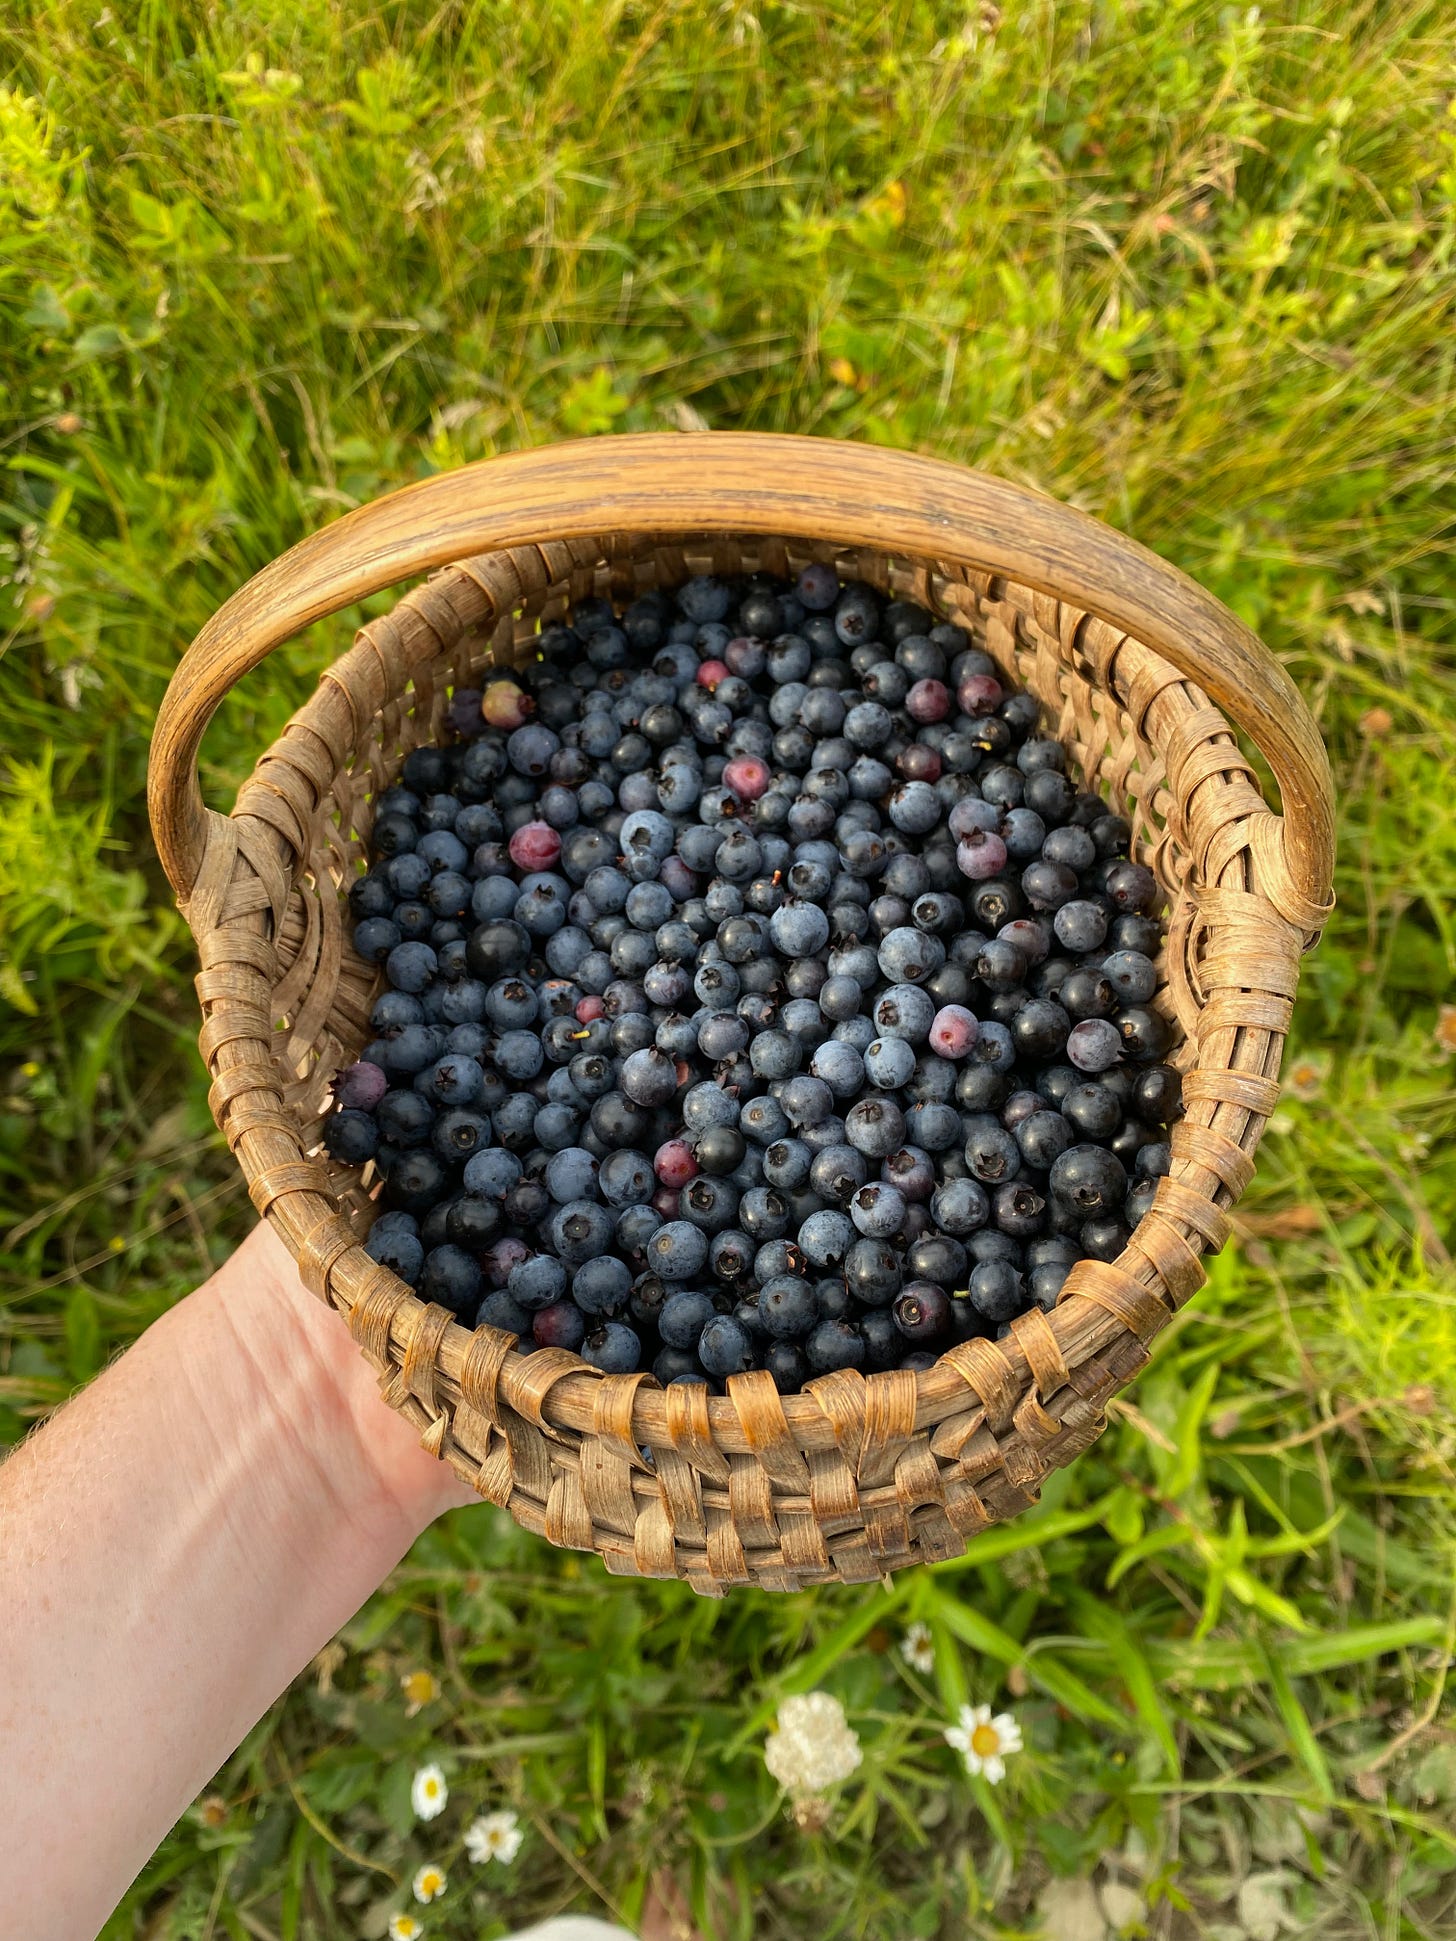 My hand holding a woven basket full of blueberries in a grassy field.